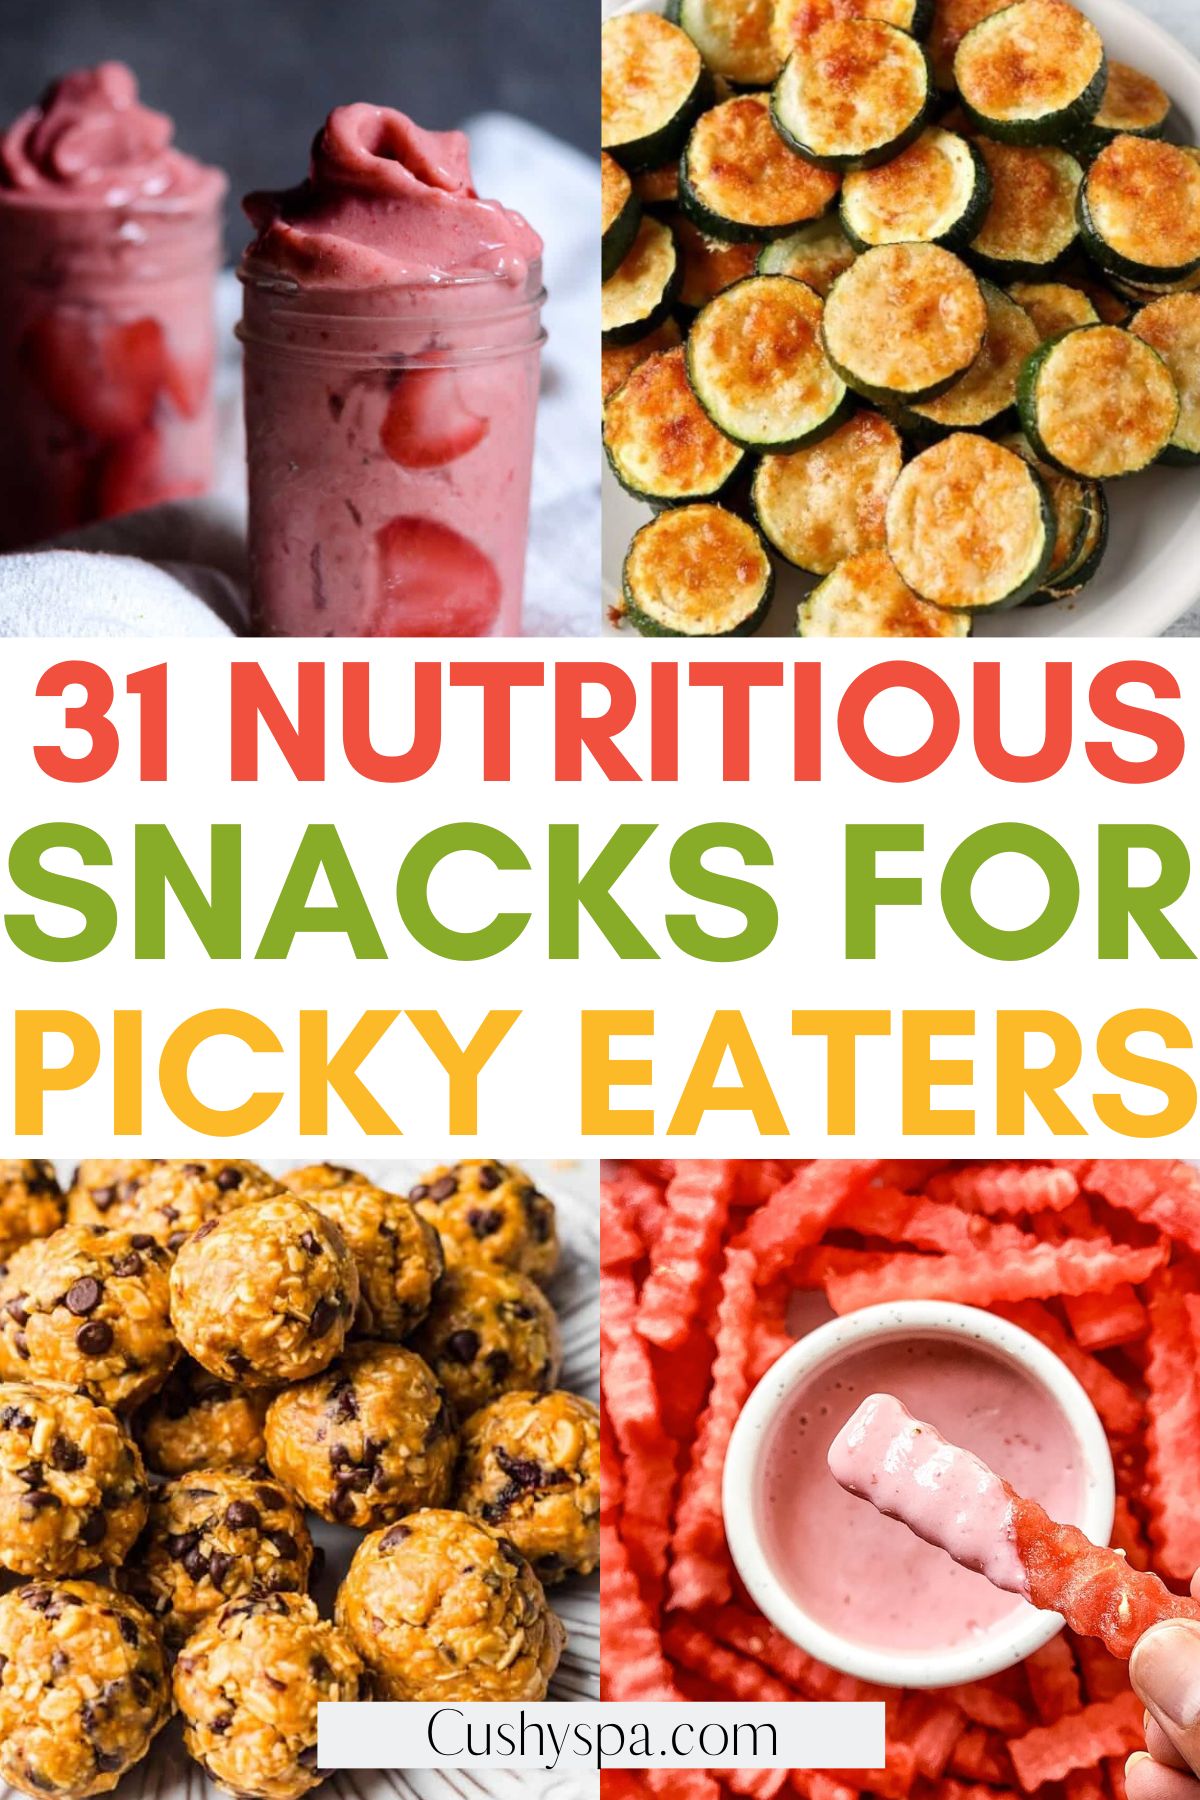 Snacks for Picky Eaters